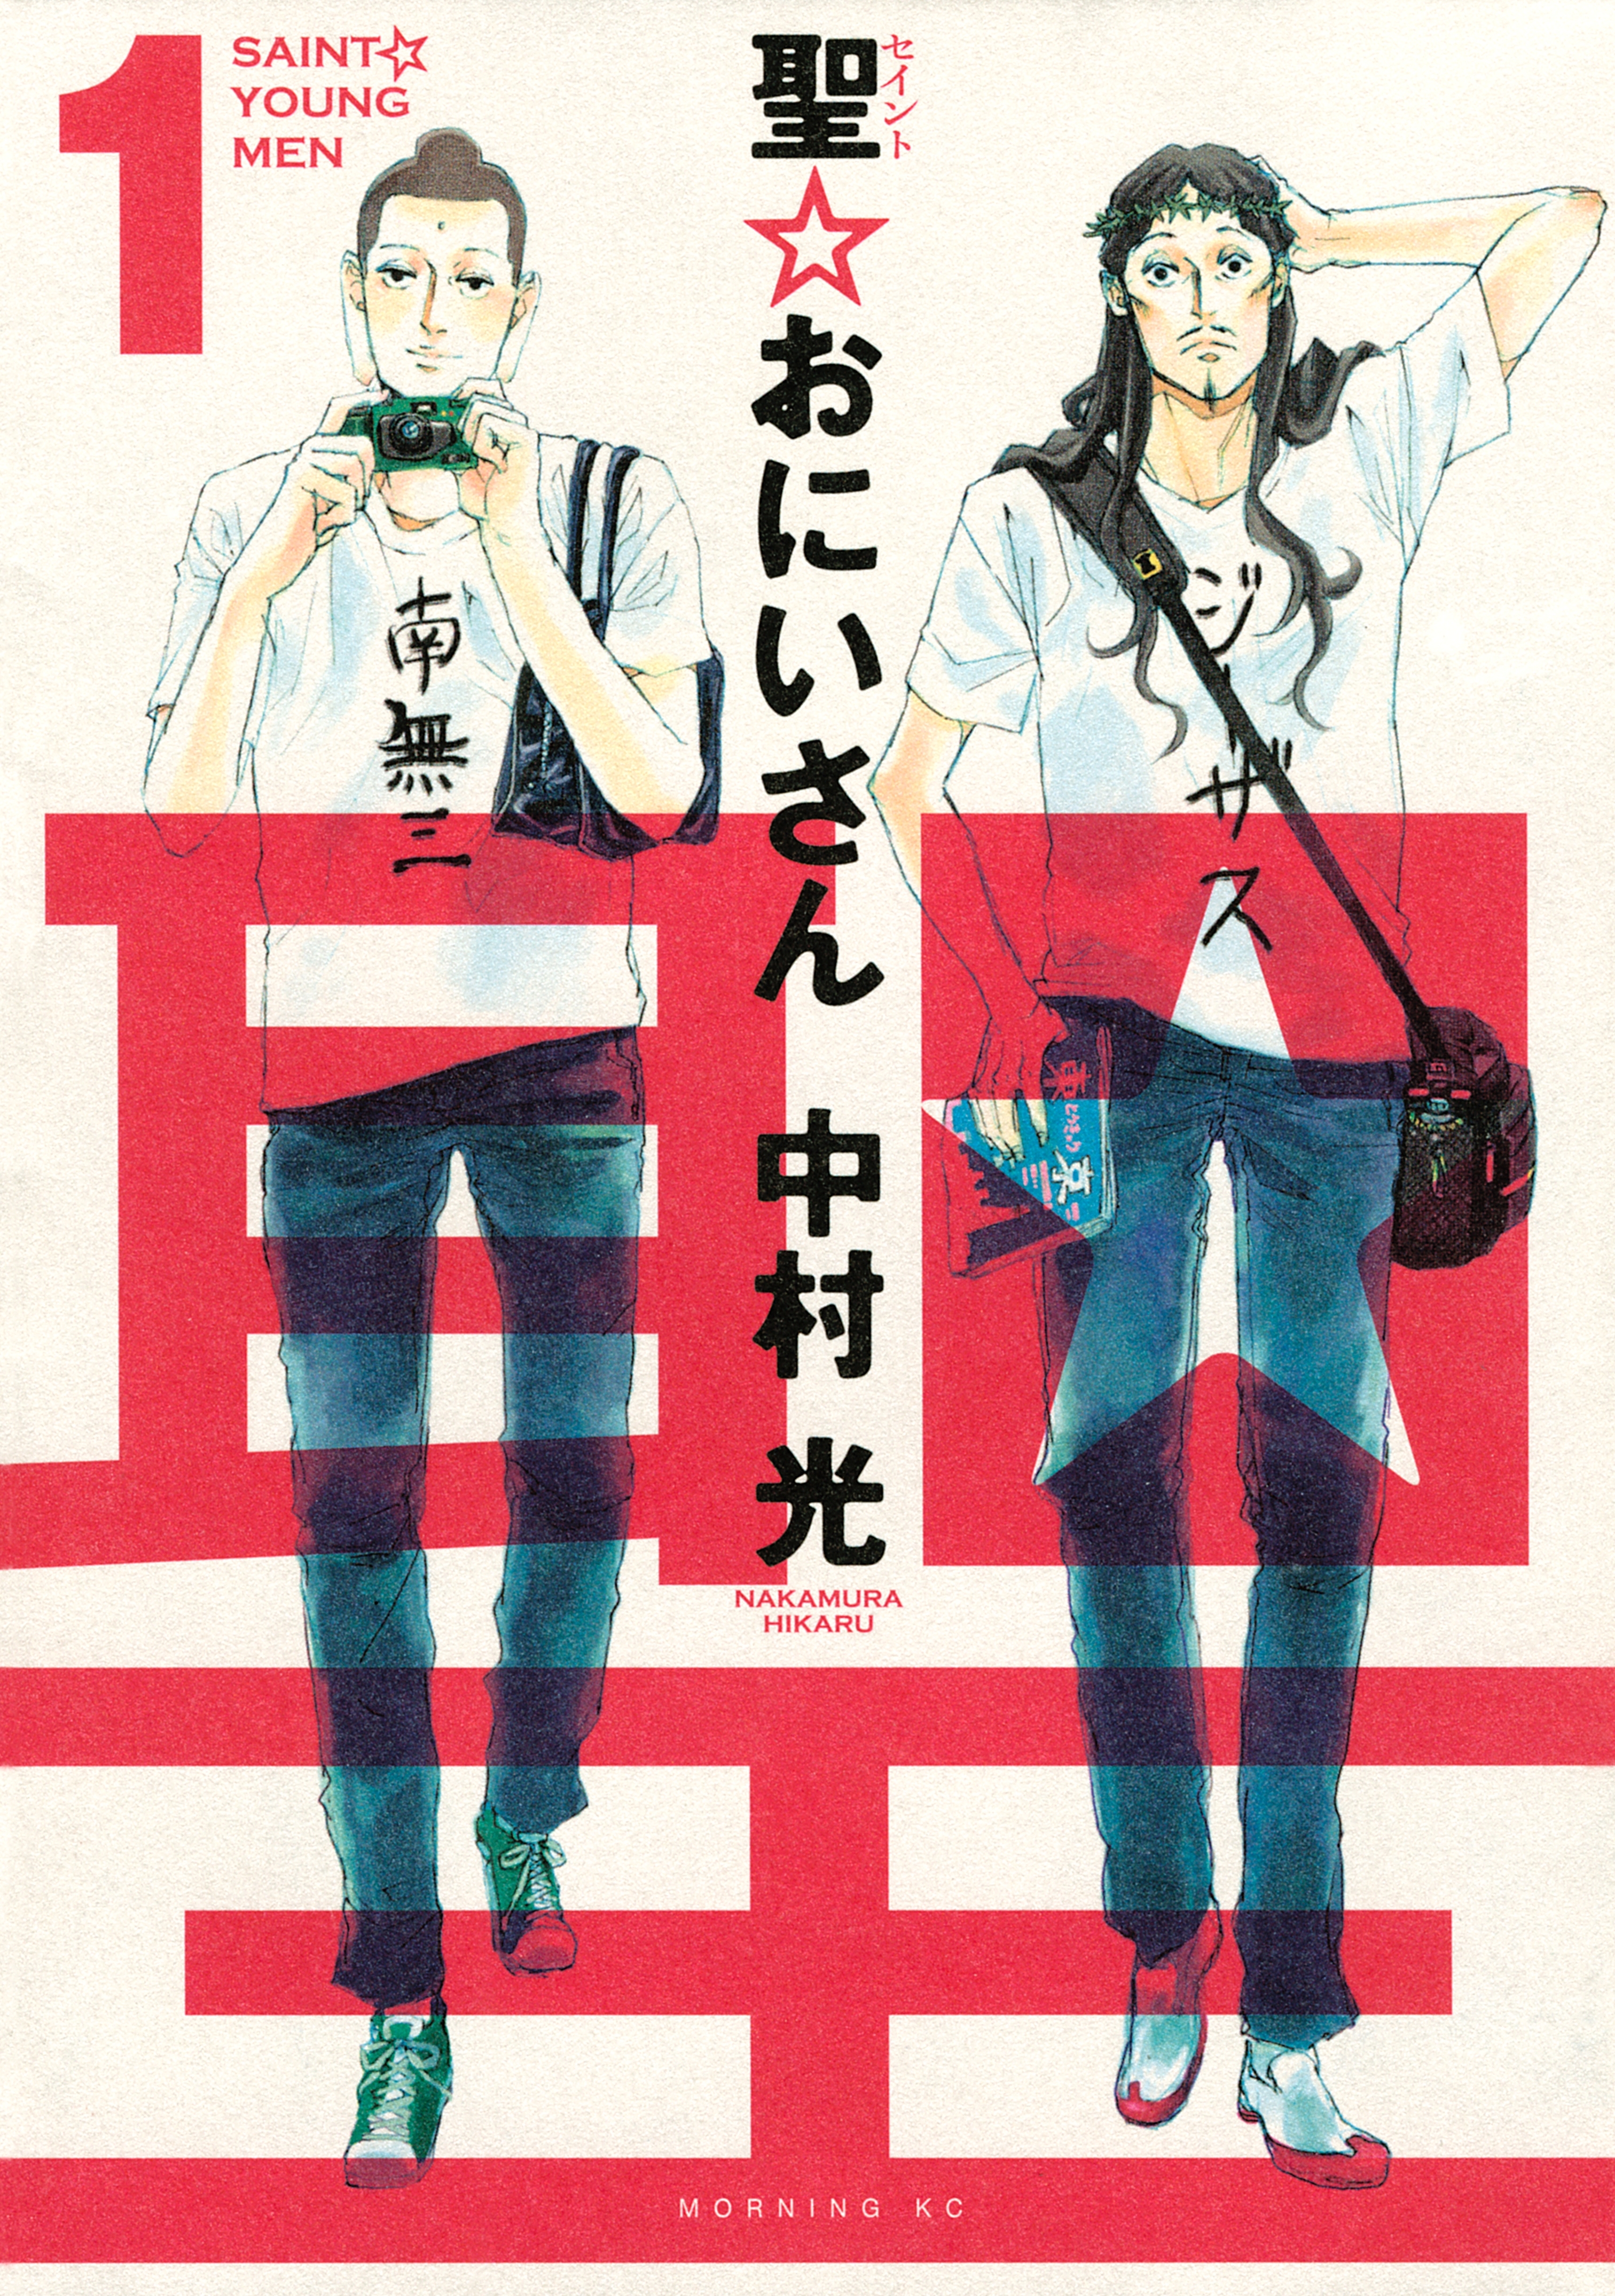 Saint Young Men Myths And Folklore Wiki Fandom